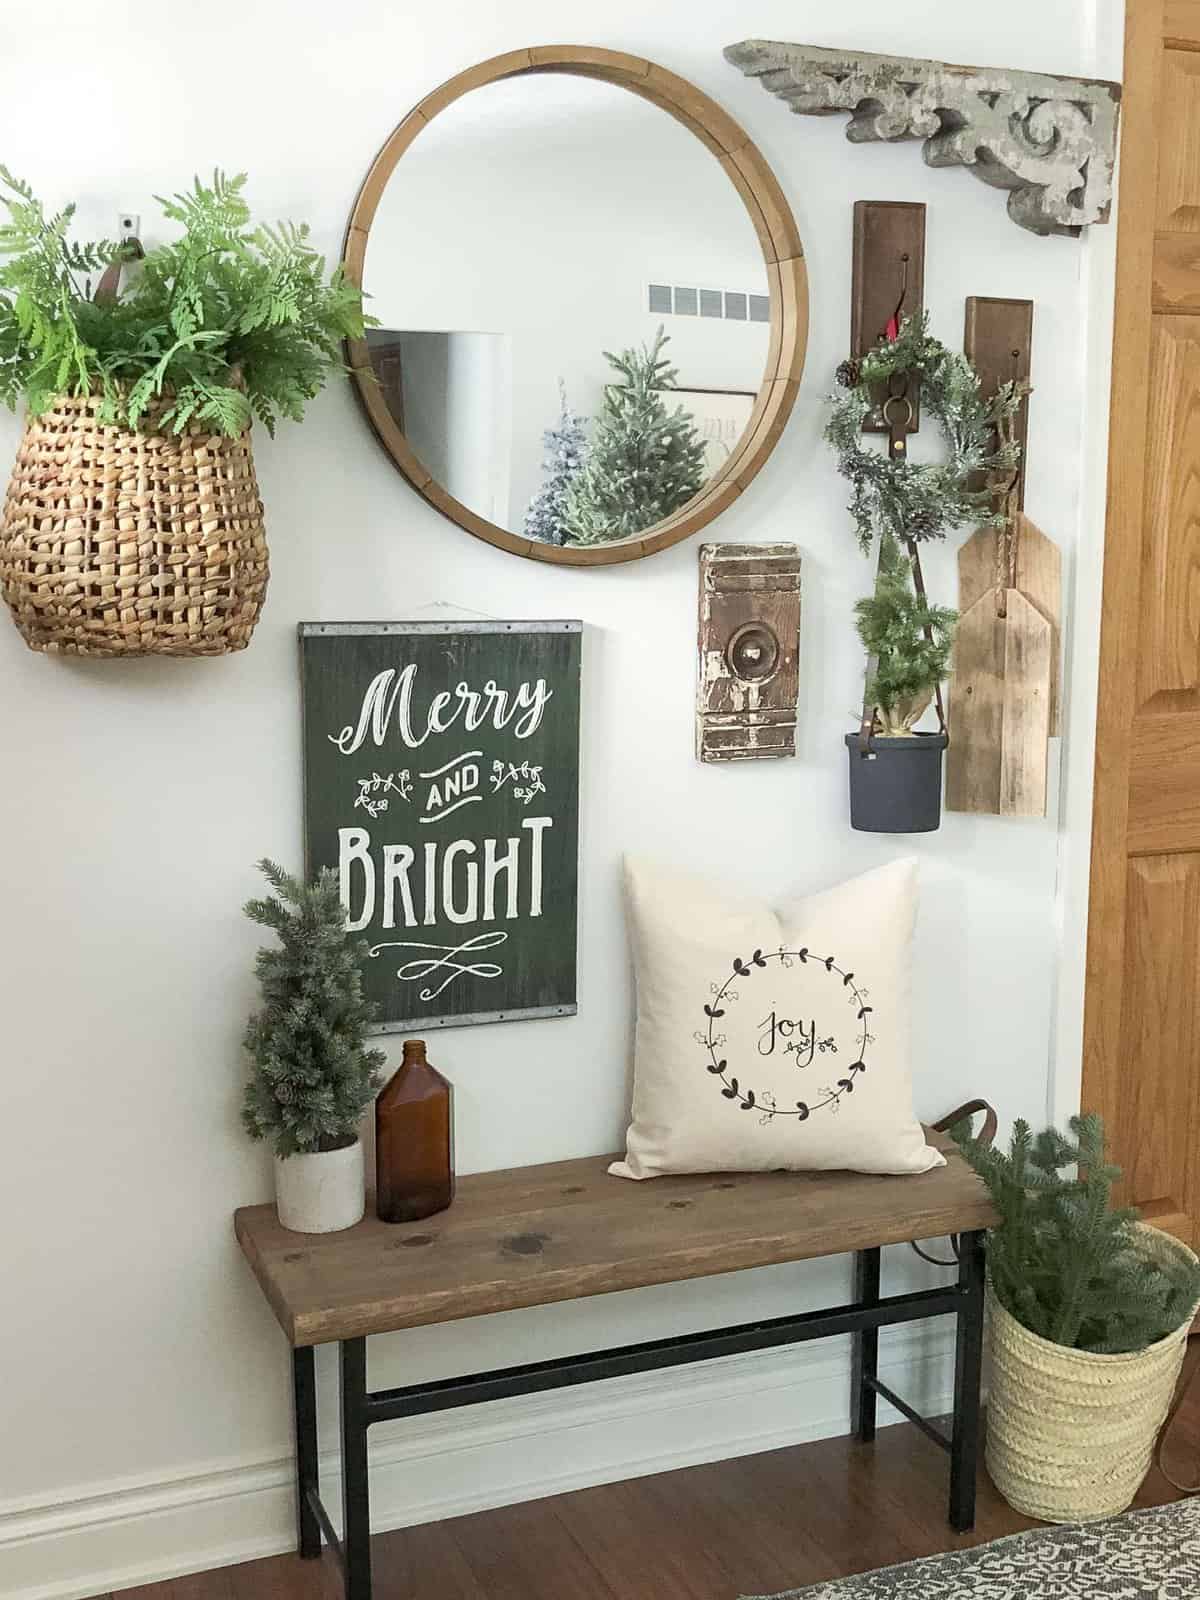 Do you have a small entryway? Today I'm sharing easy tricks and tips to style an entry with simple Christmas entryway decor. #entrywaydecor #christmasdecor #simplechristmasdecor #fromhousetohaven